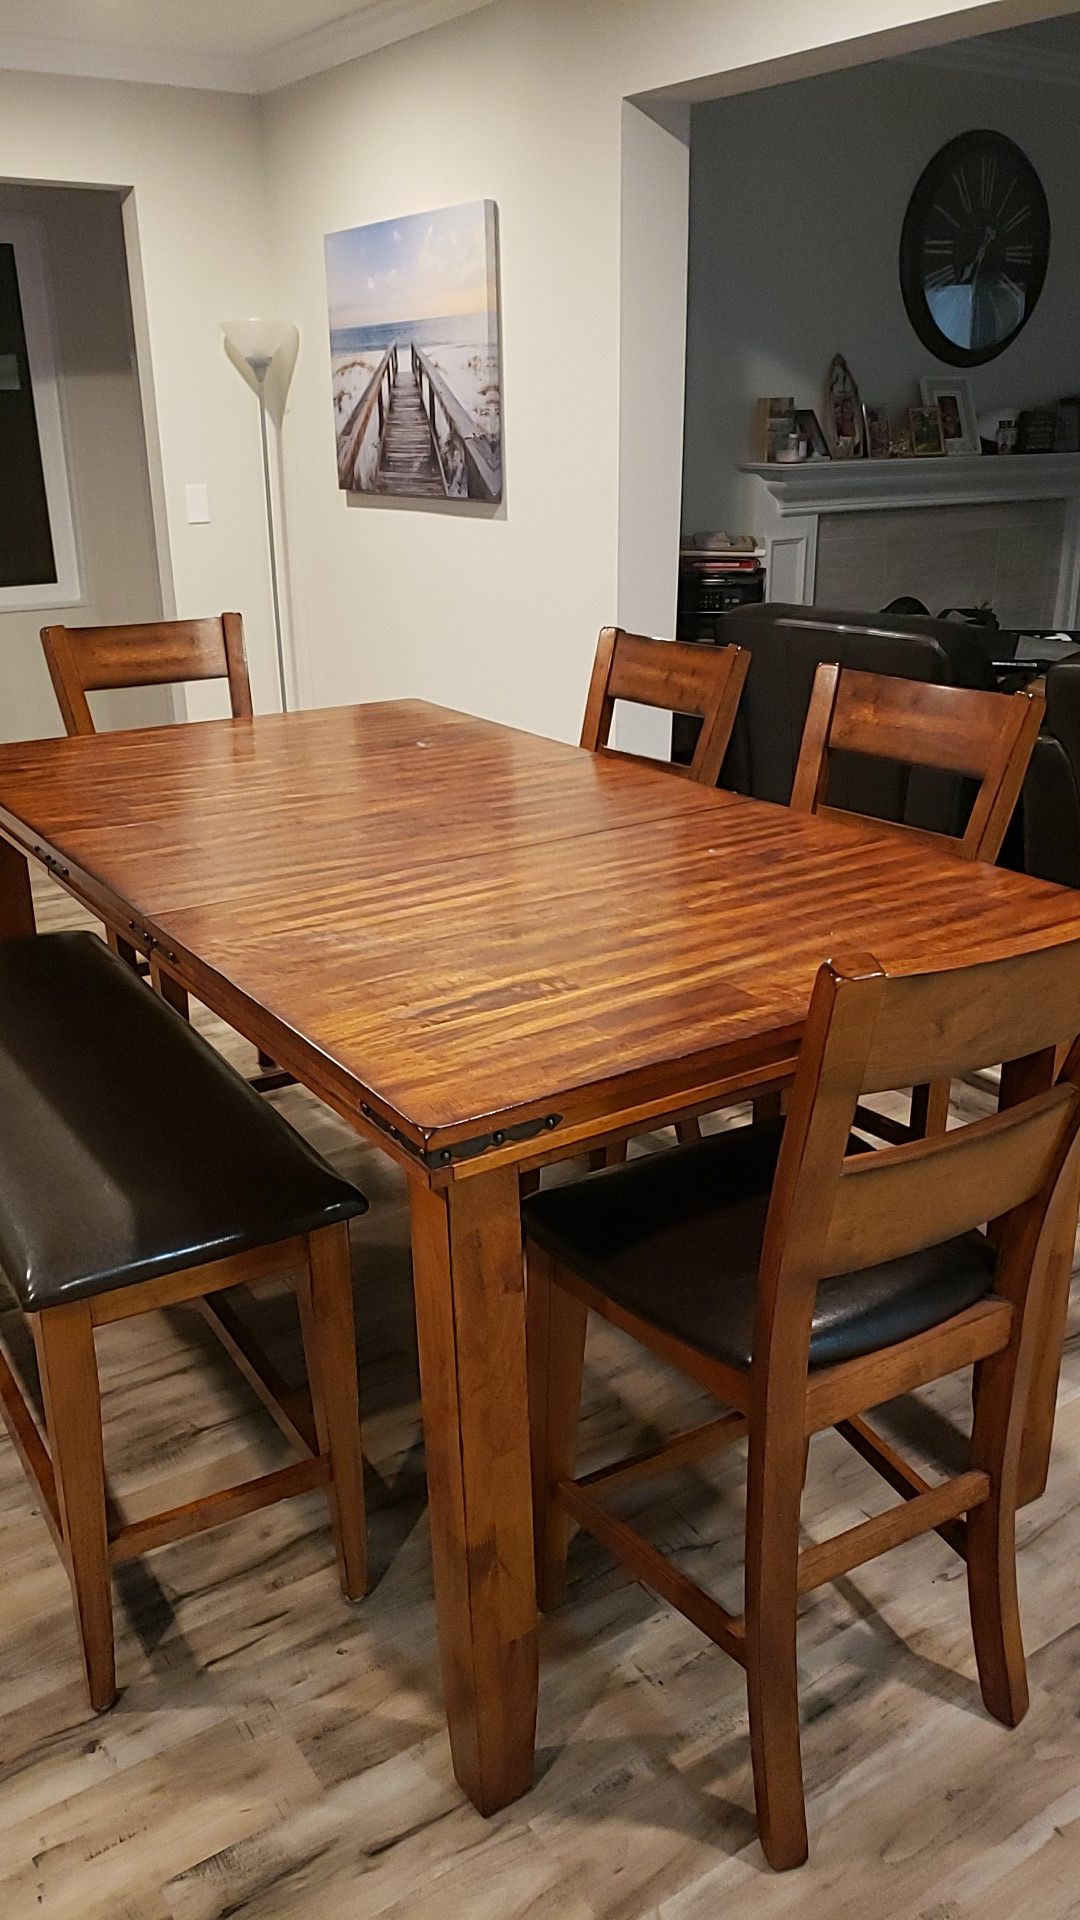 Kitchen table with 4 chairs and bench. Good condition. 250.00